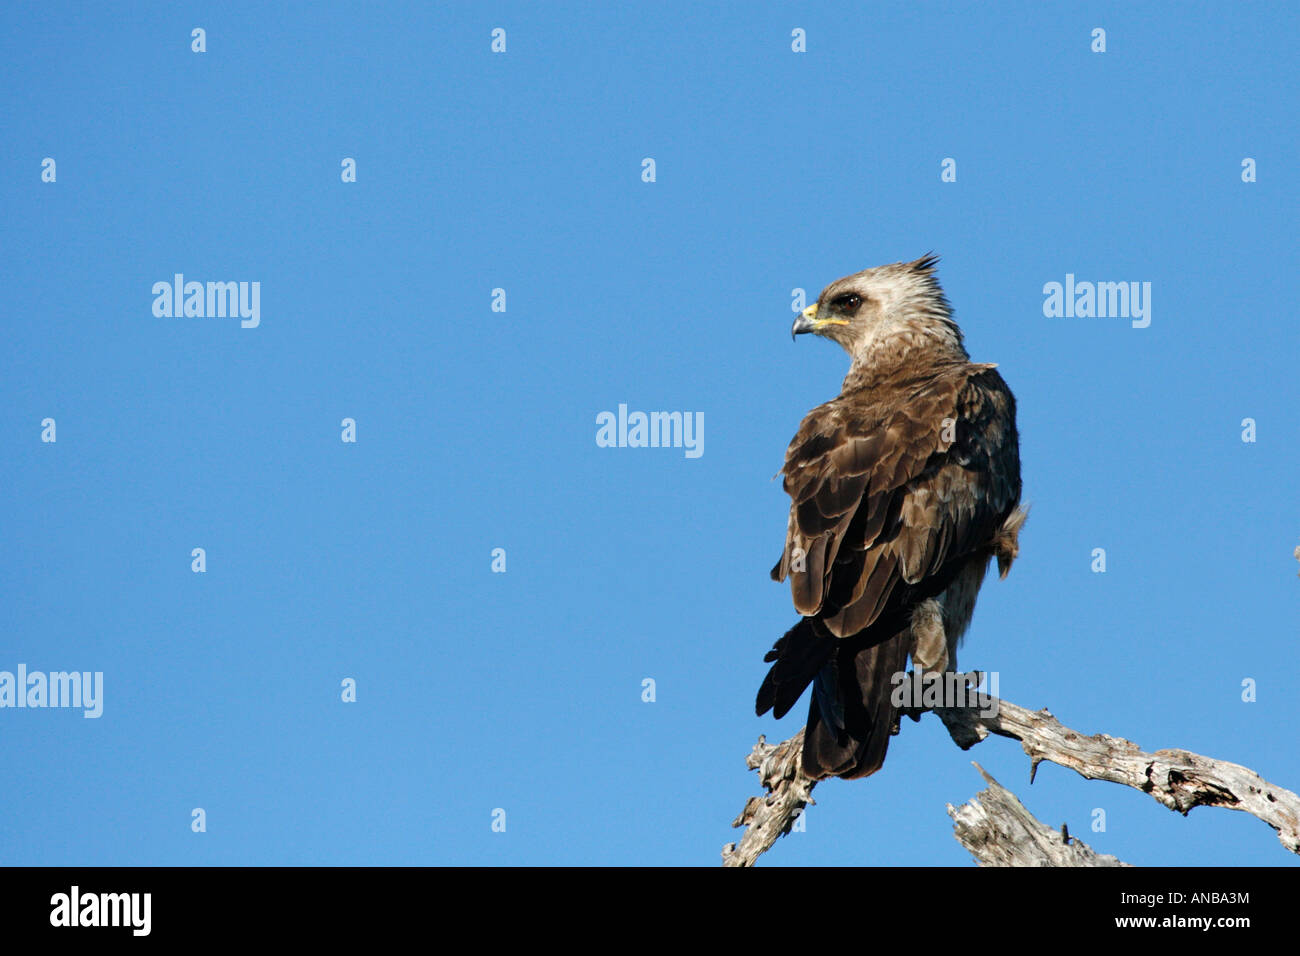 Wahlberg's eagle perched on dead branch Stock Photo